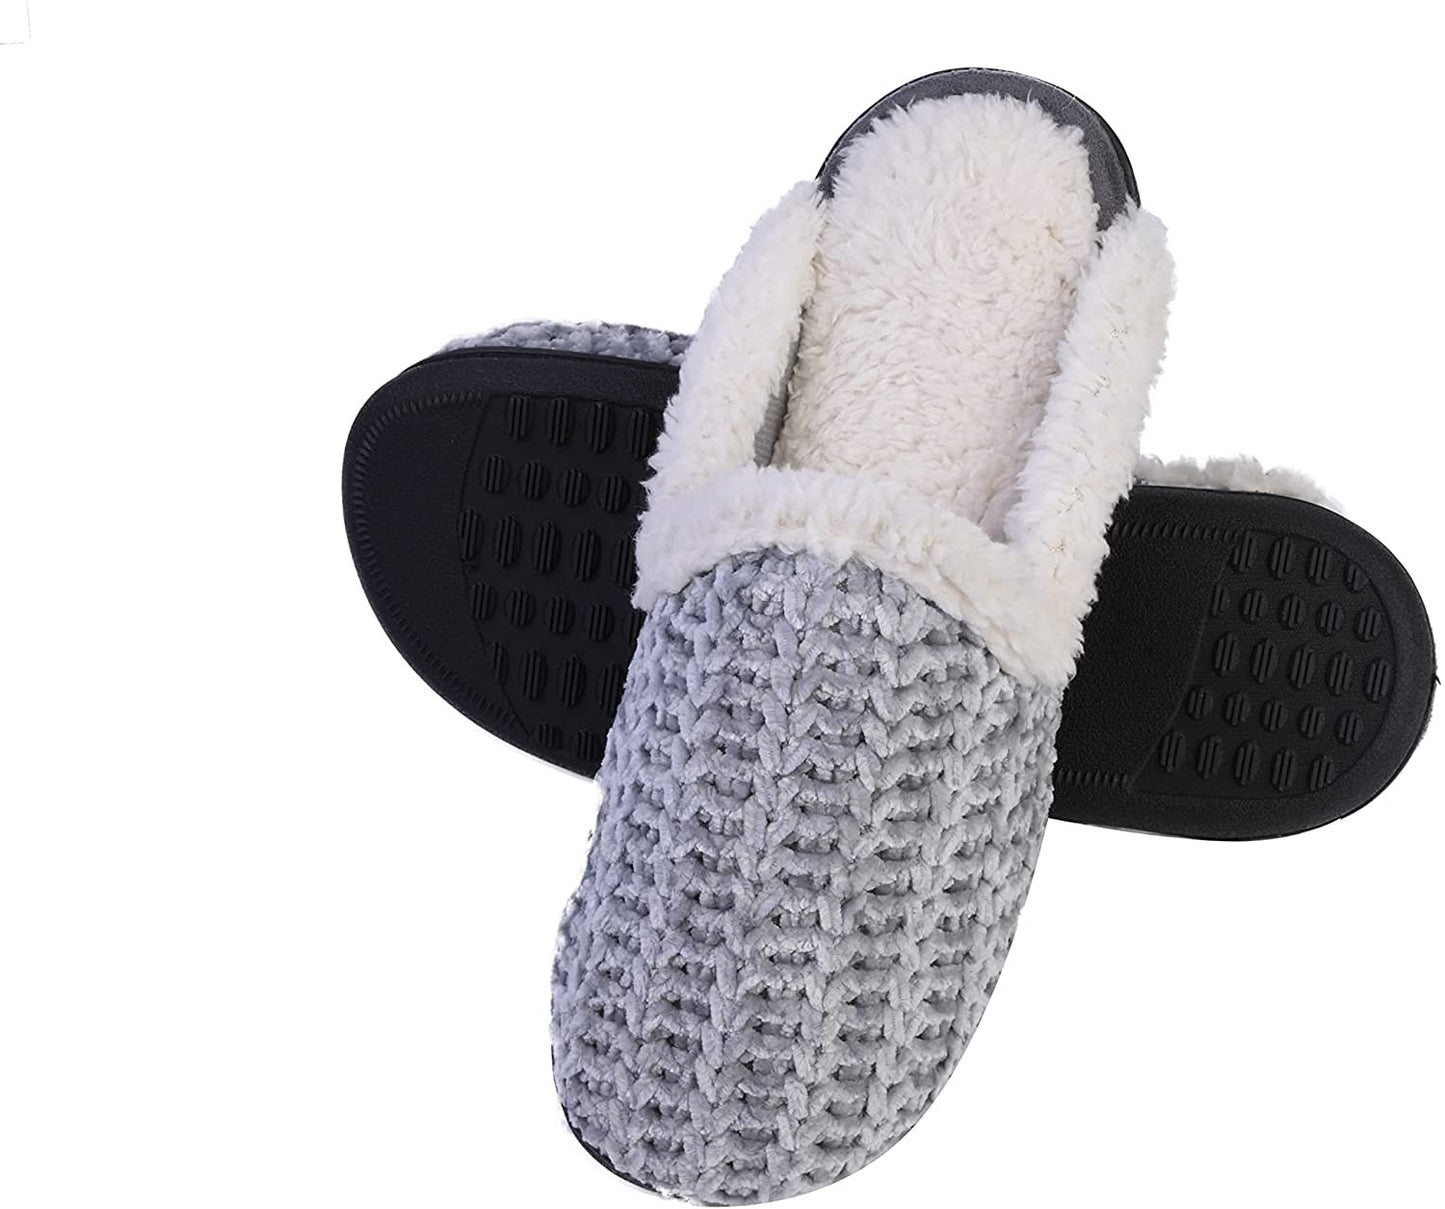 Roxoni Memory Foam Slippers for Women Plush Heels and Anti-Skid Rubber Sole